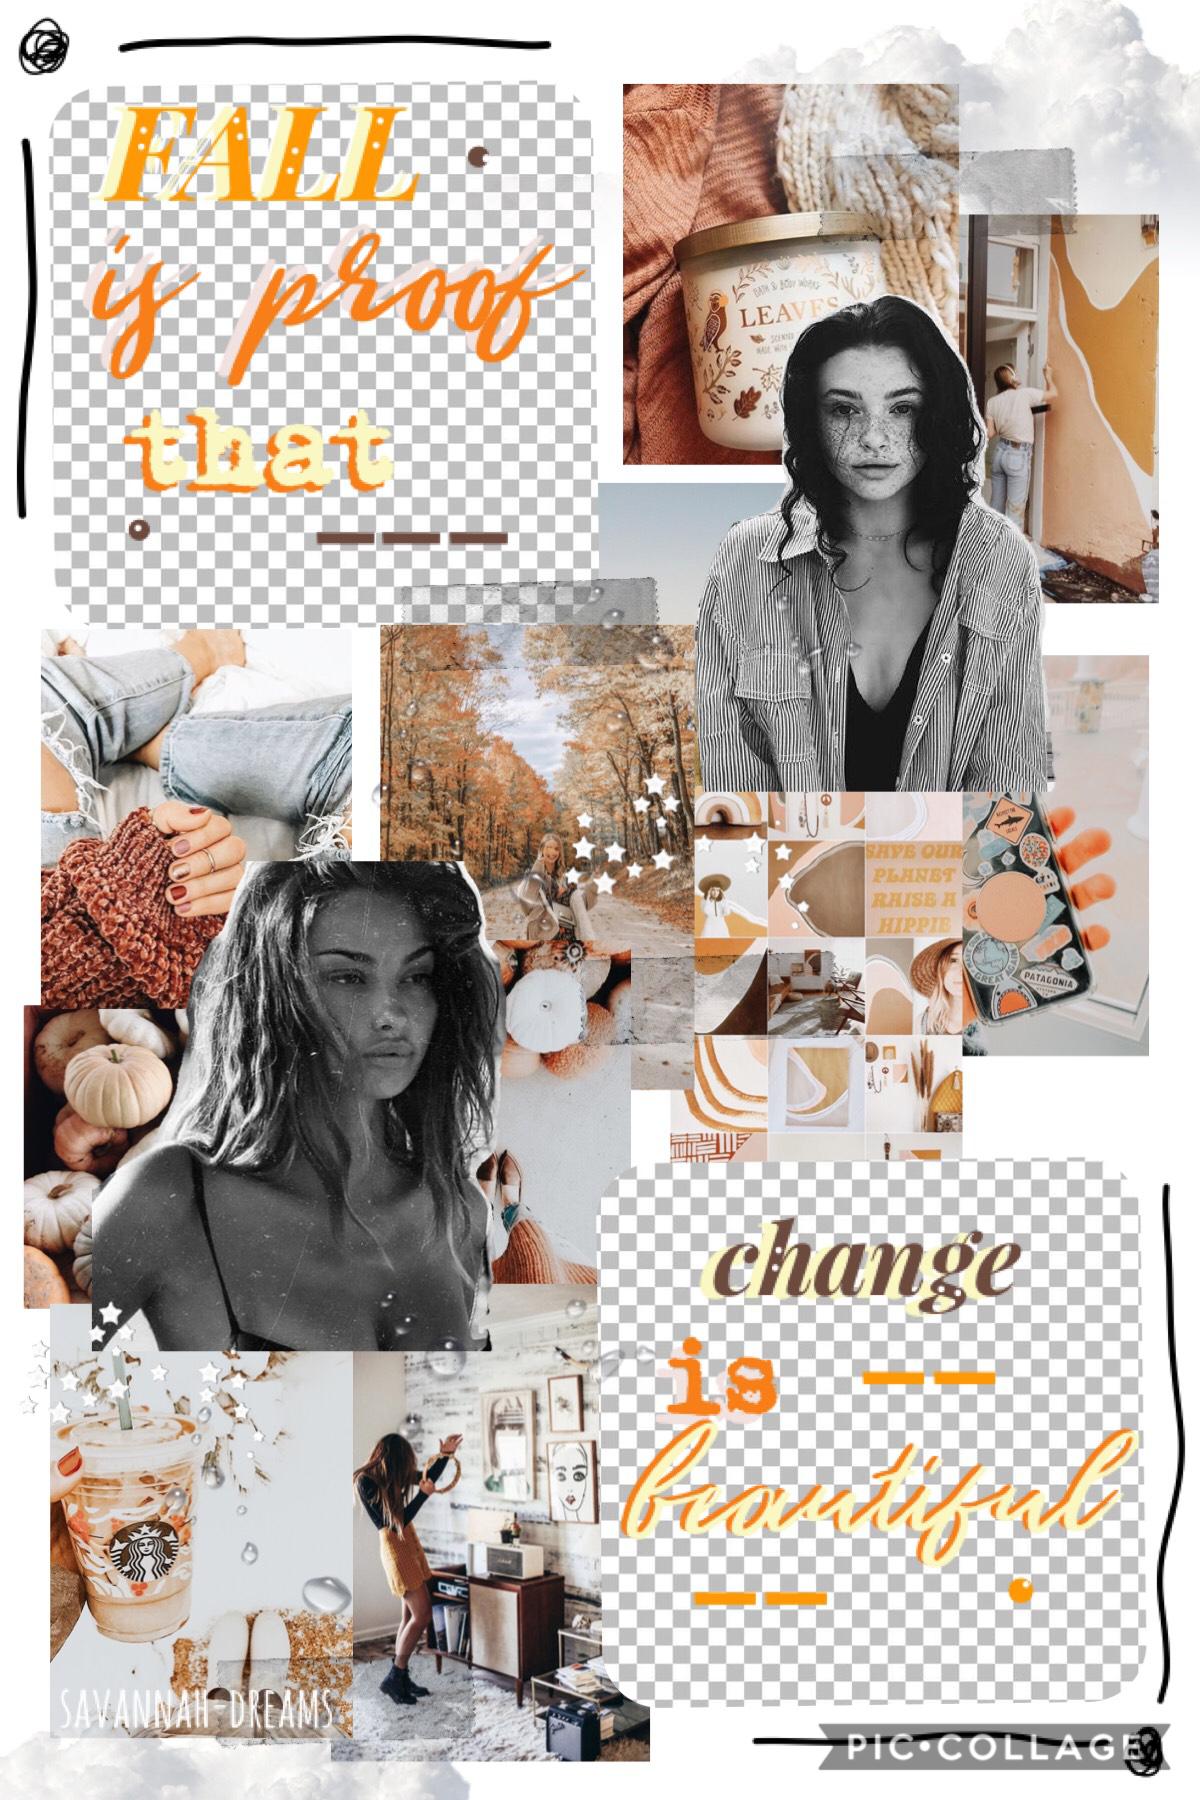 eee it's spooky szn 🍊💨 oop not here in australia but oh well, i'll celebrate anyhow, lol 😂 tysm for 1.4 K 👏🏼 whoop whoop 🌿 entry to a fall contest > love the bg but I'm not so sure 'bout the text... 🍡